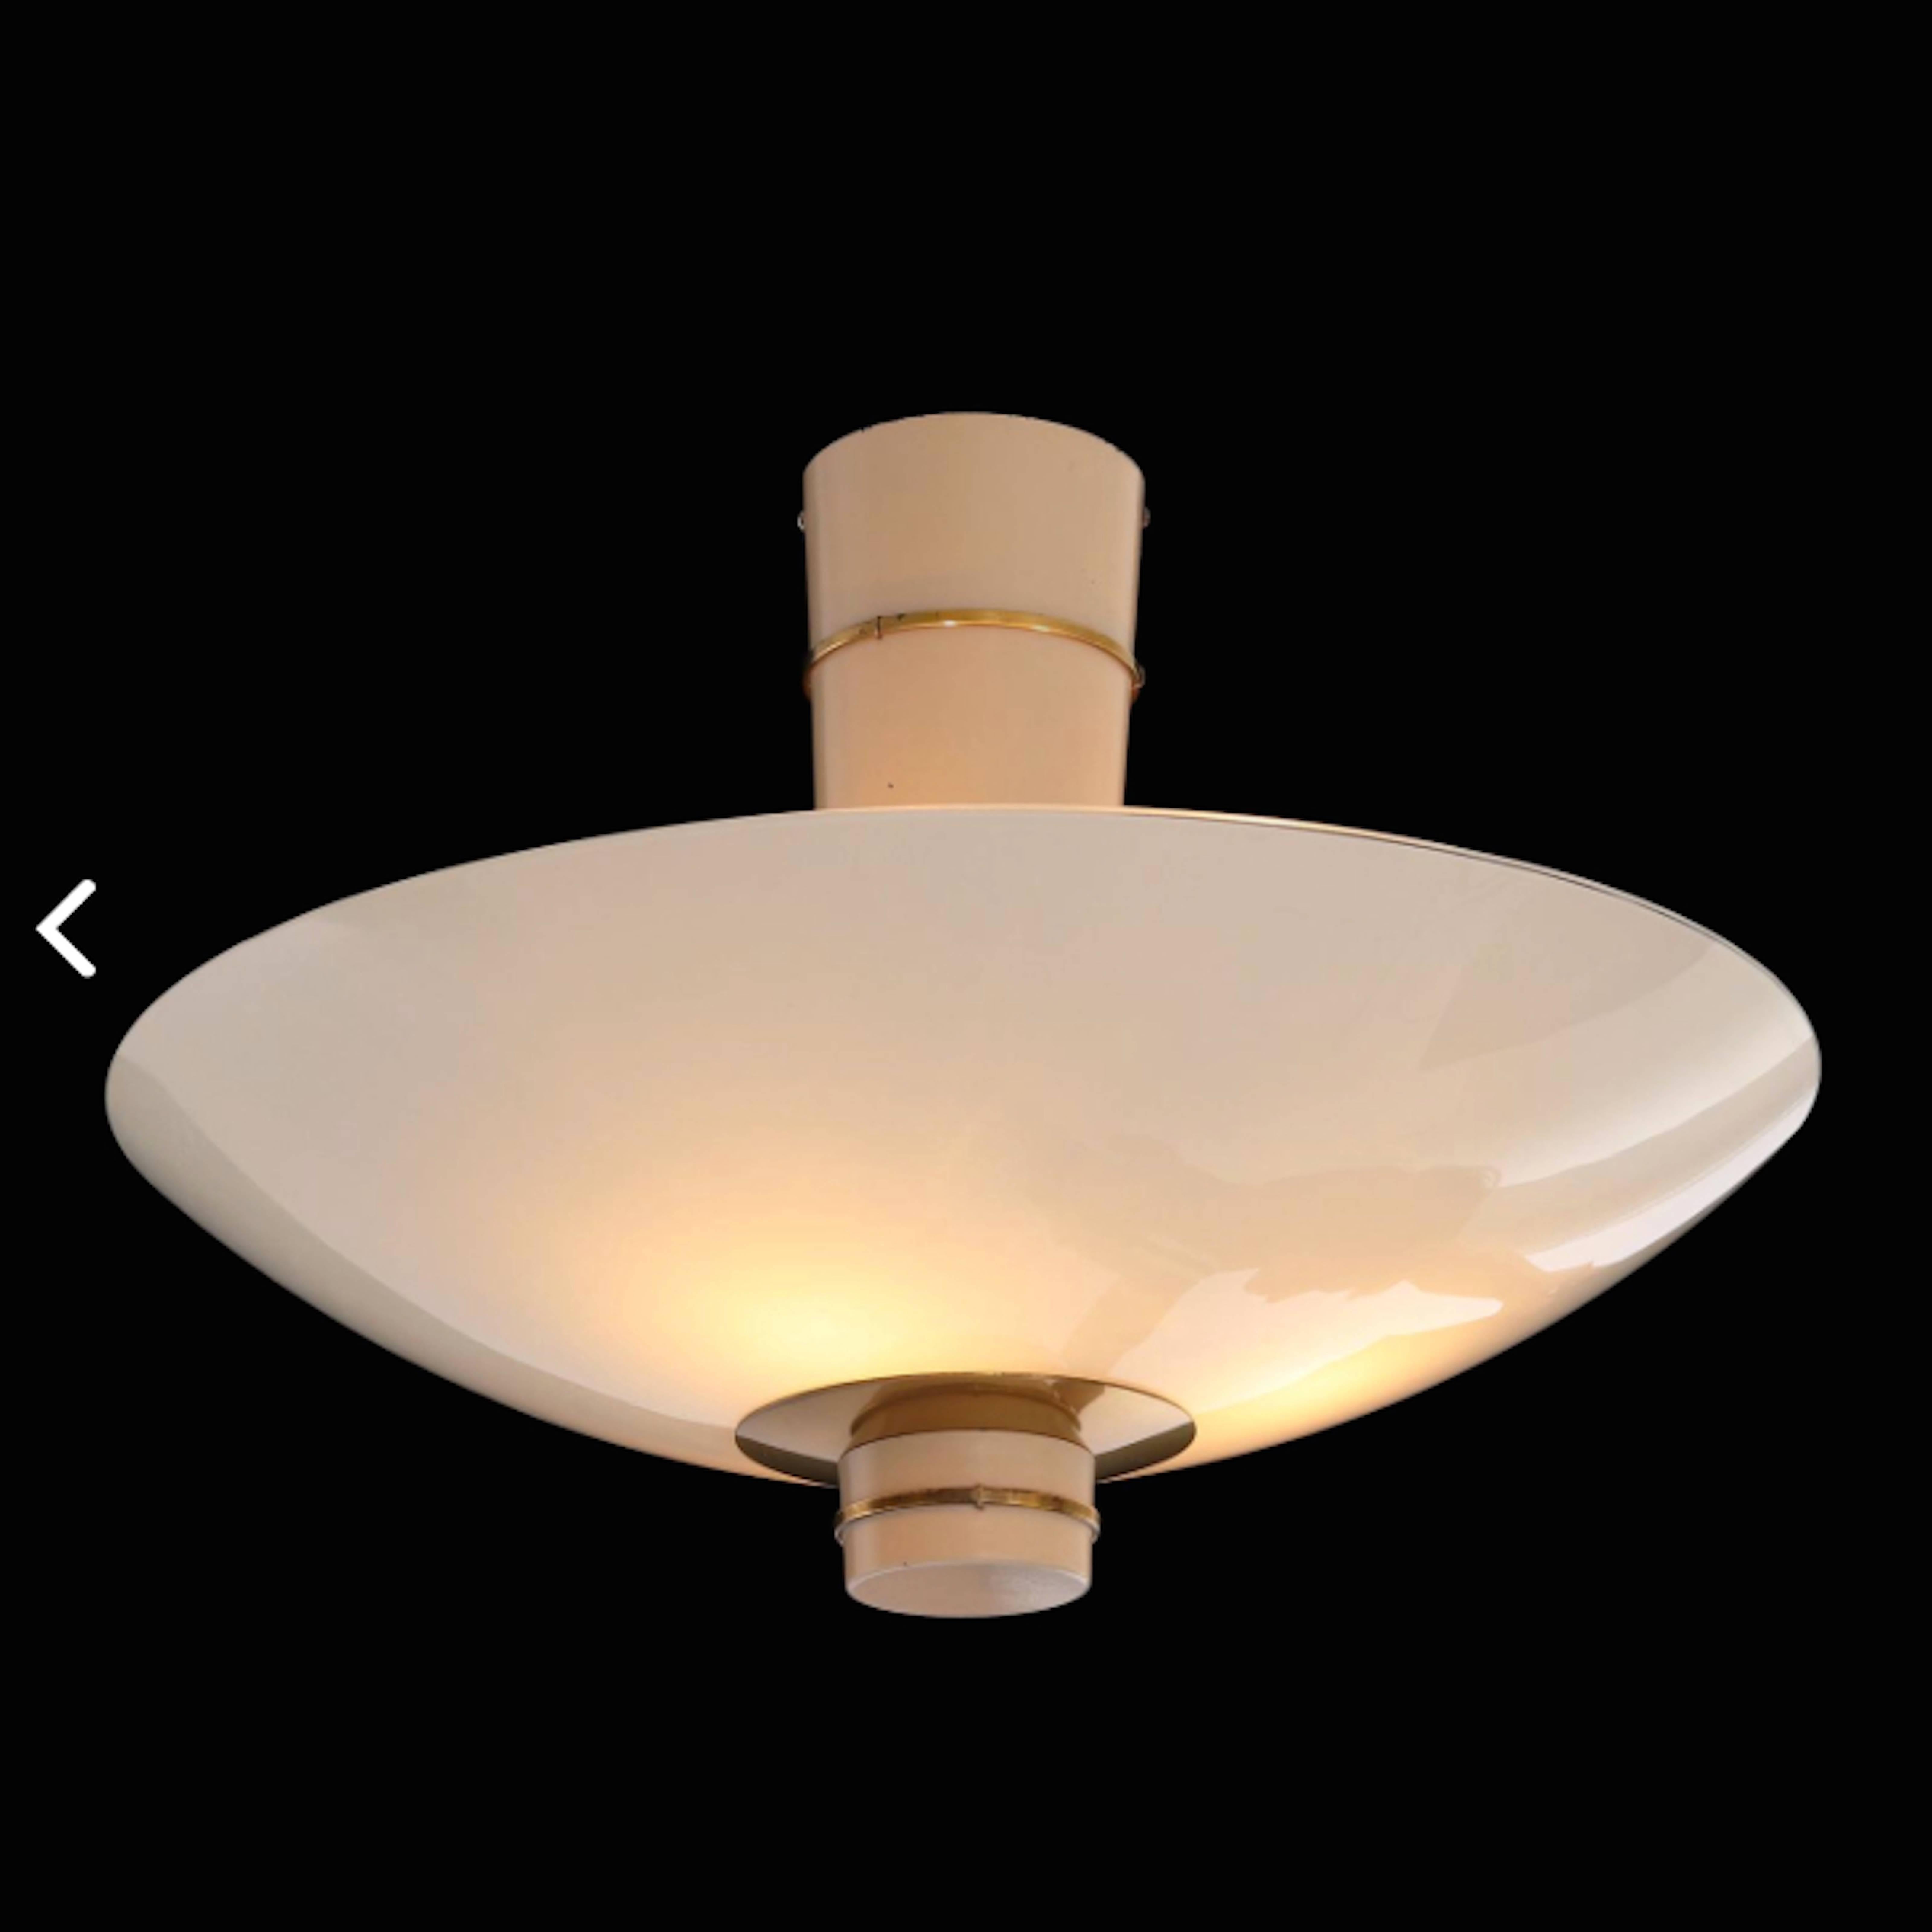 Scandinavian Modern Paavo Tynell Ceiling Lamp, Model 9055 for Taito Oy, 1940